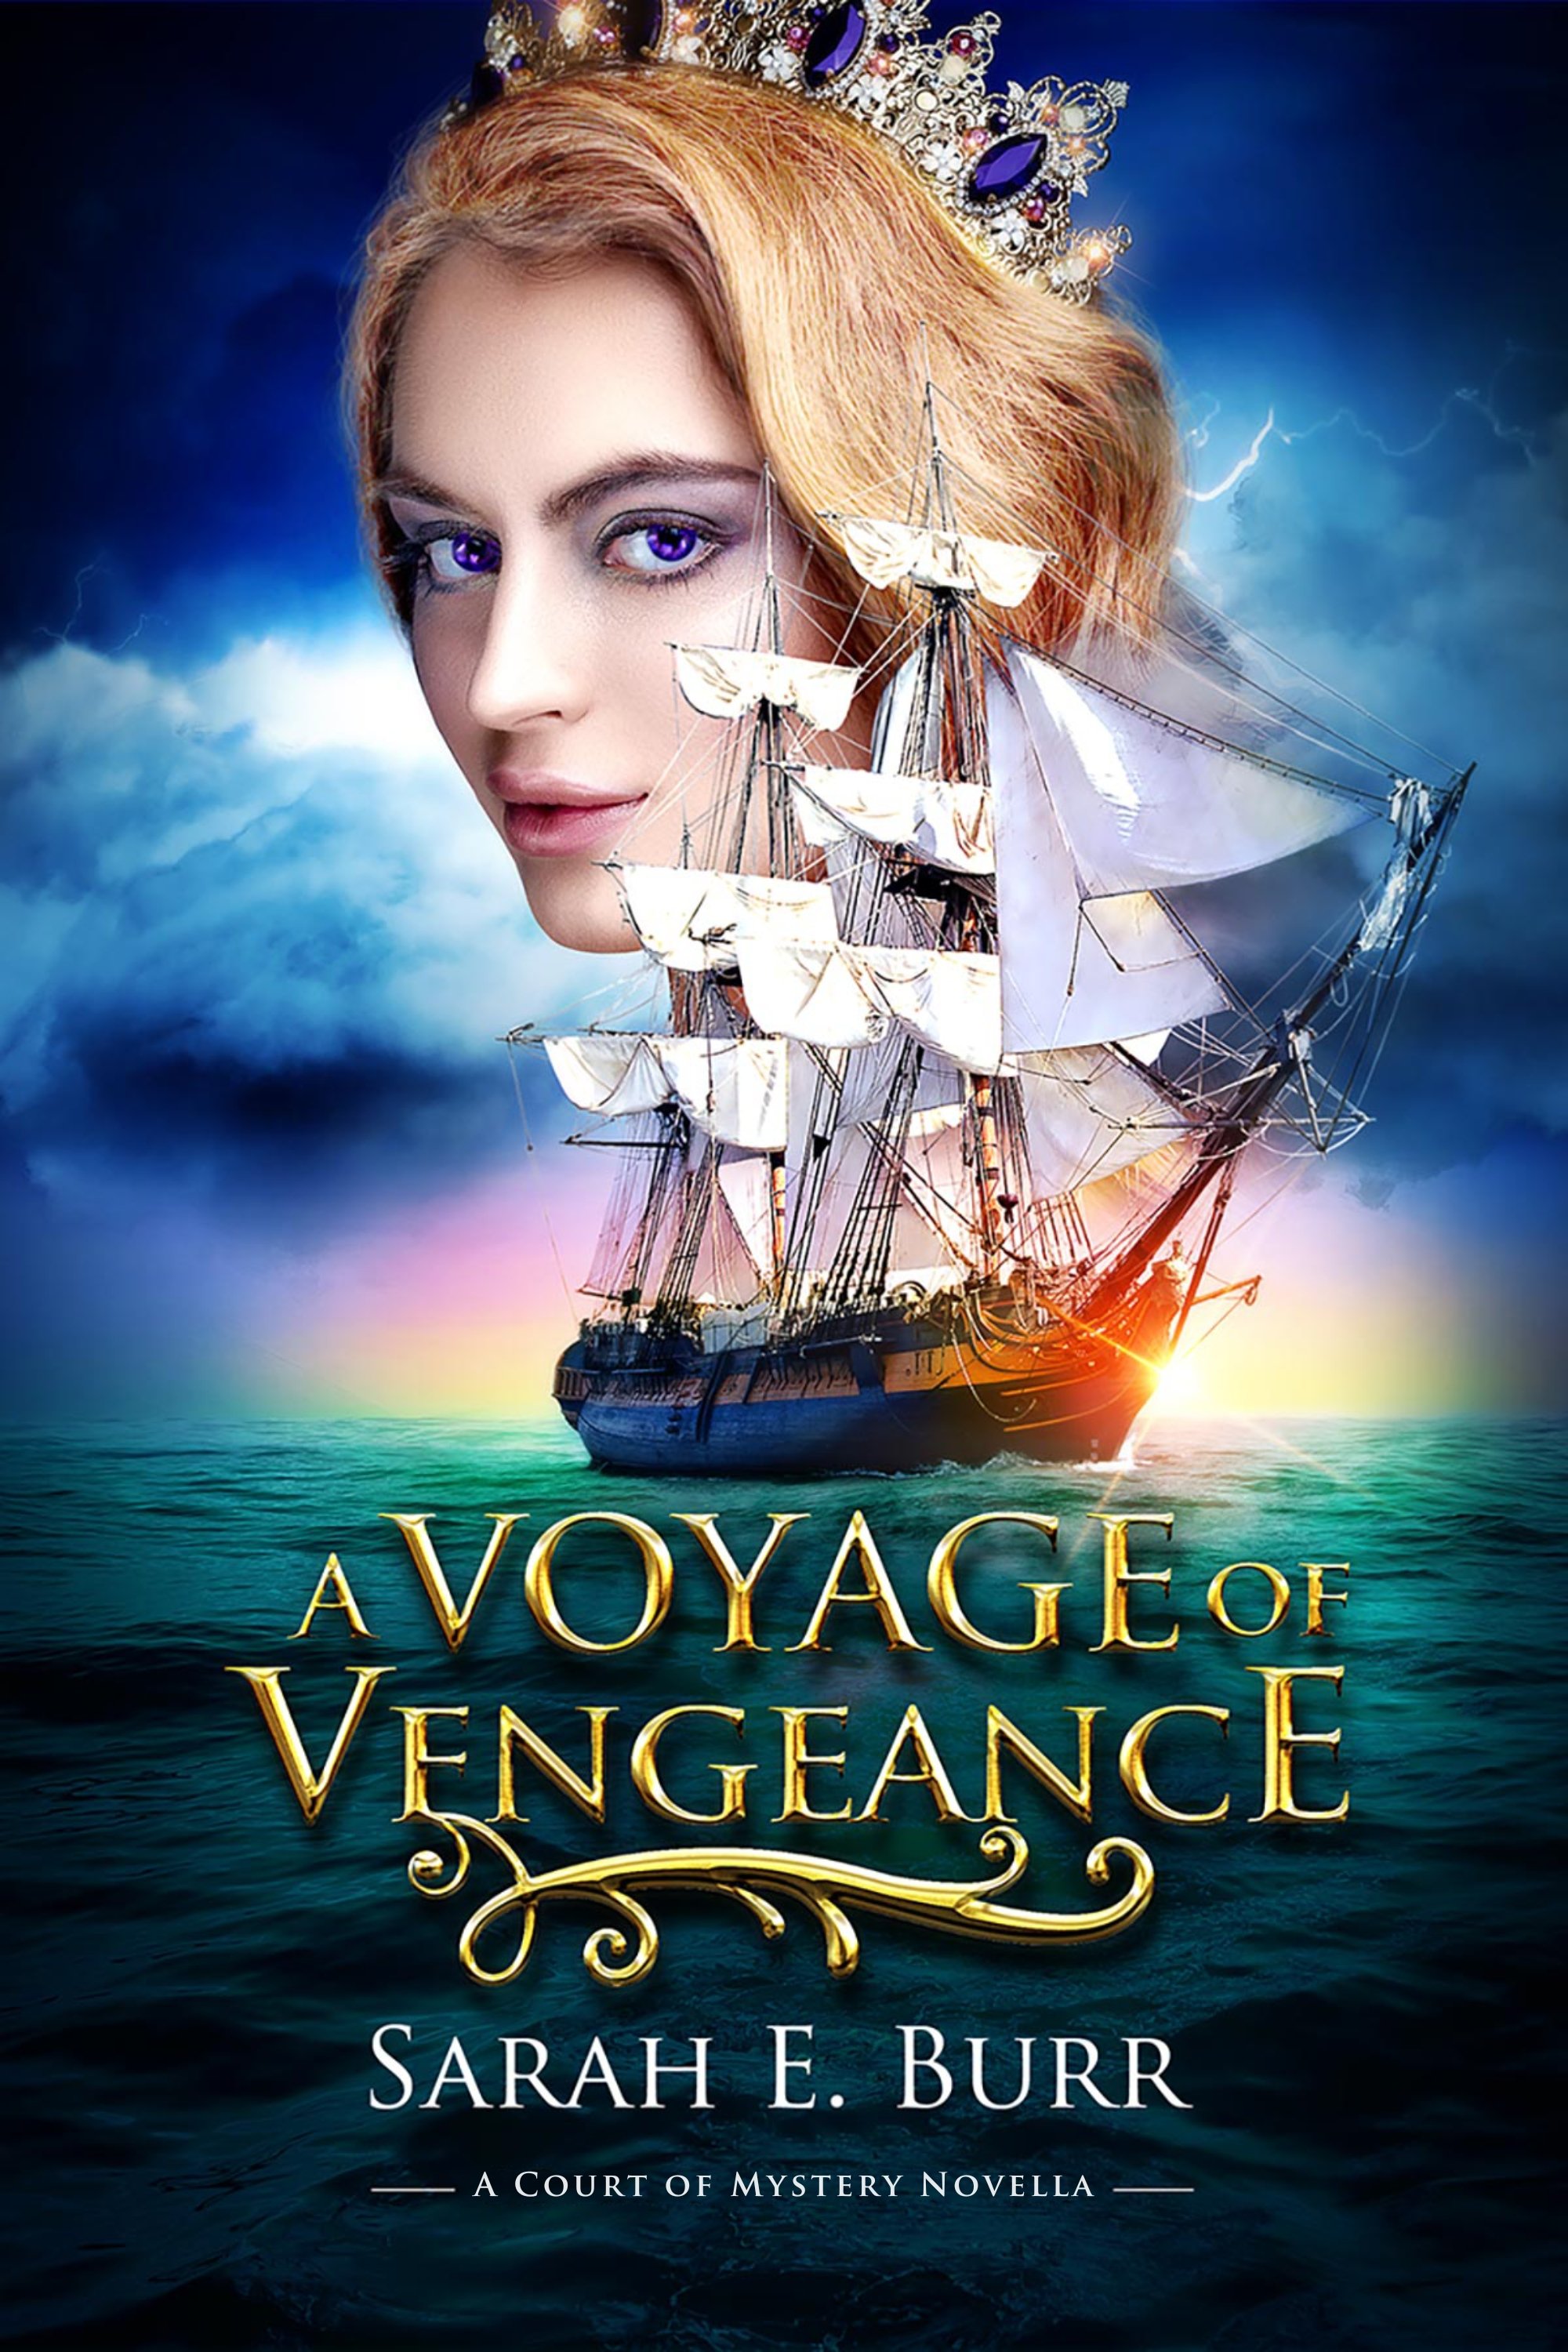 A Voyage of Vengeance